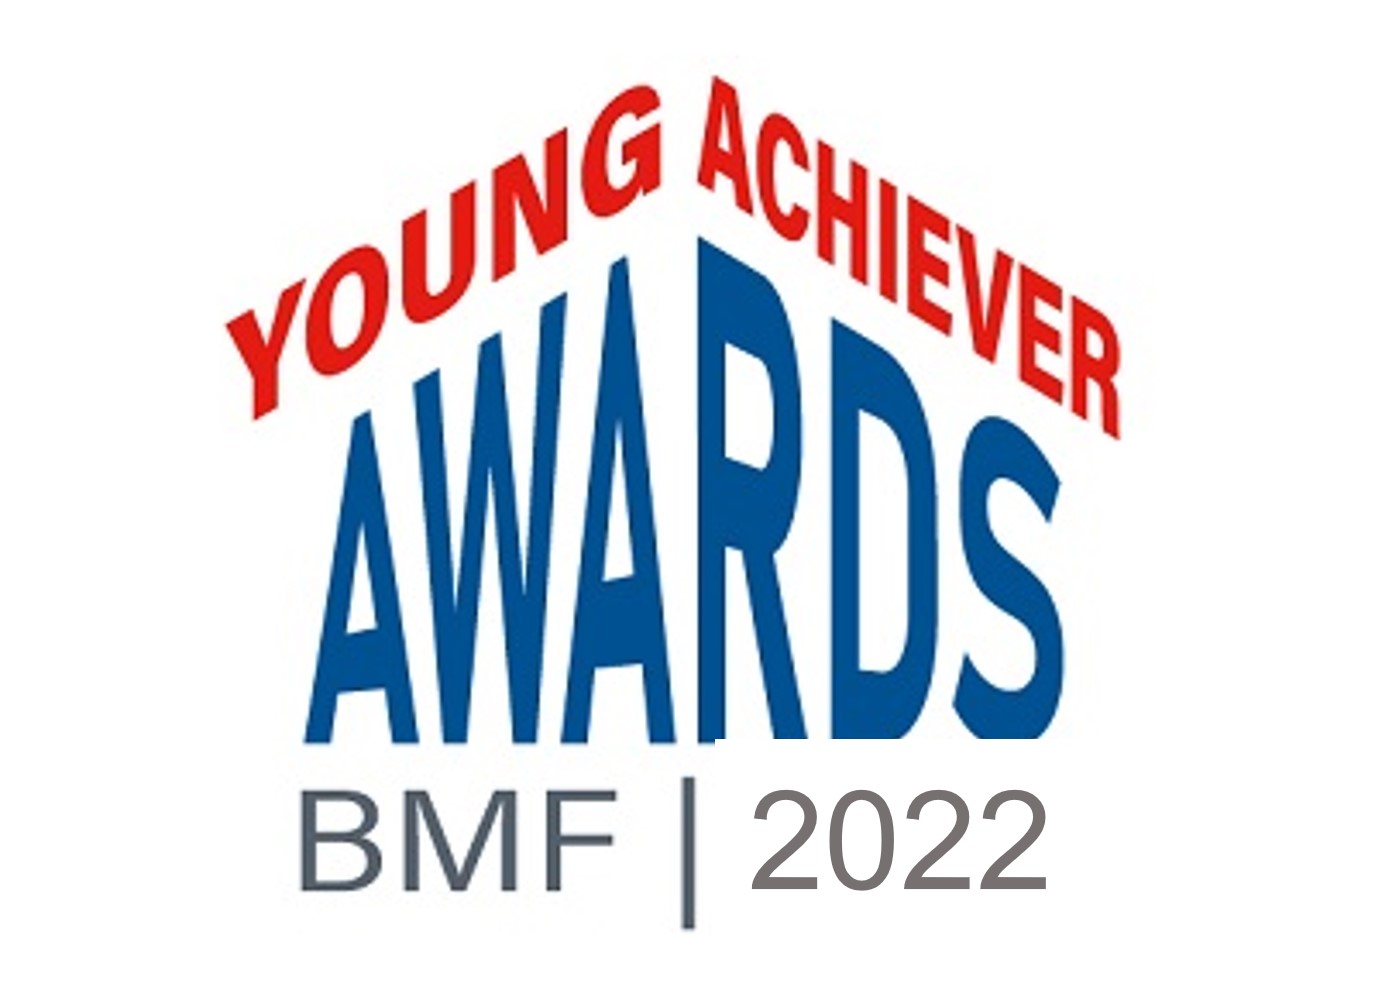 BMF Young Achiever Awards 2022